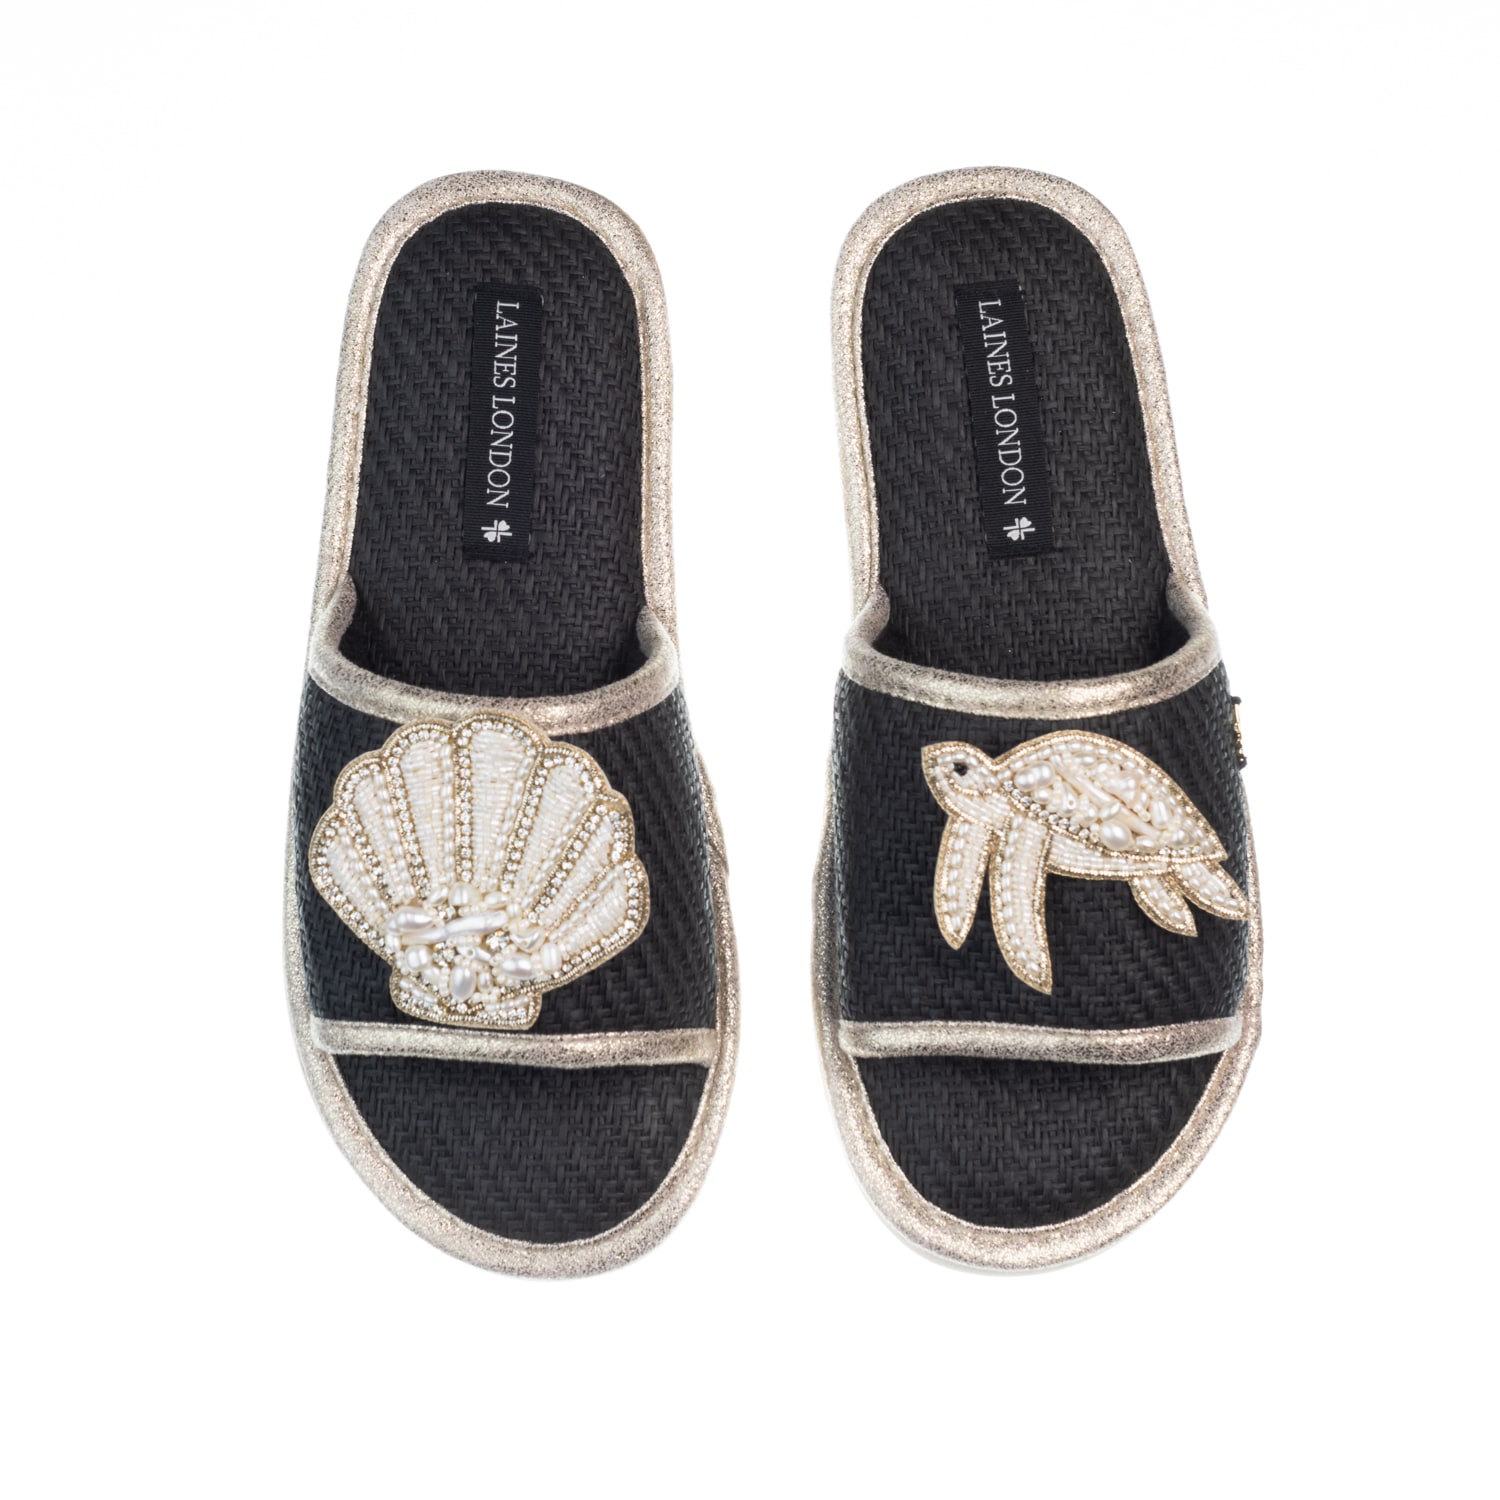 Laines London Women's Straw Braided Sandals With Beaded Shell & Turtle Brooches - Black